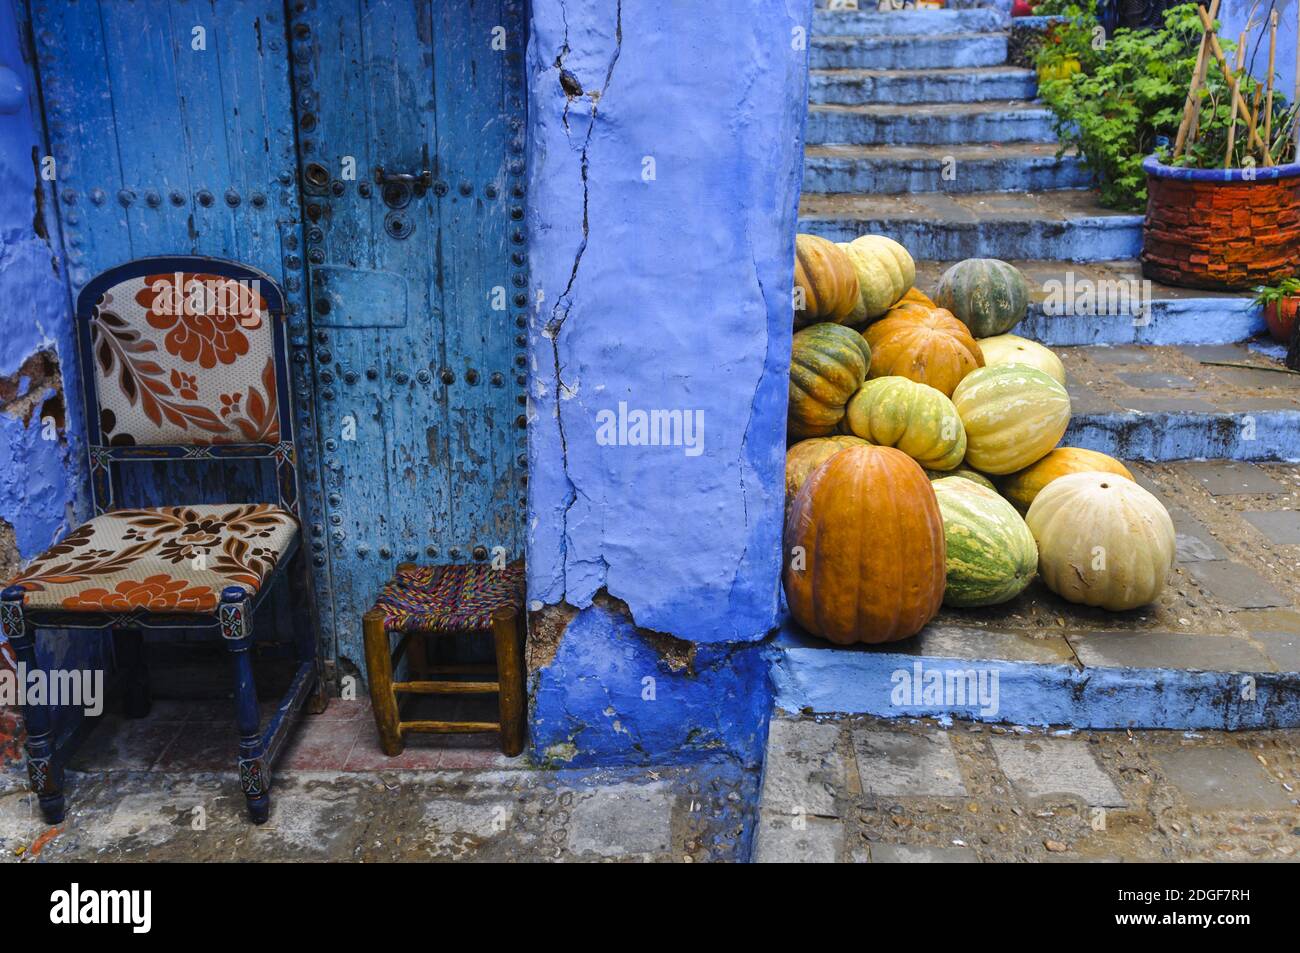 Public walkway in the blue city Chefchaouen, Morocco, Africa. Stock Photo